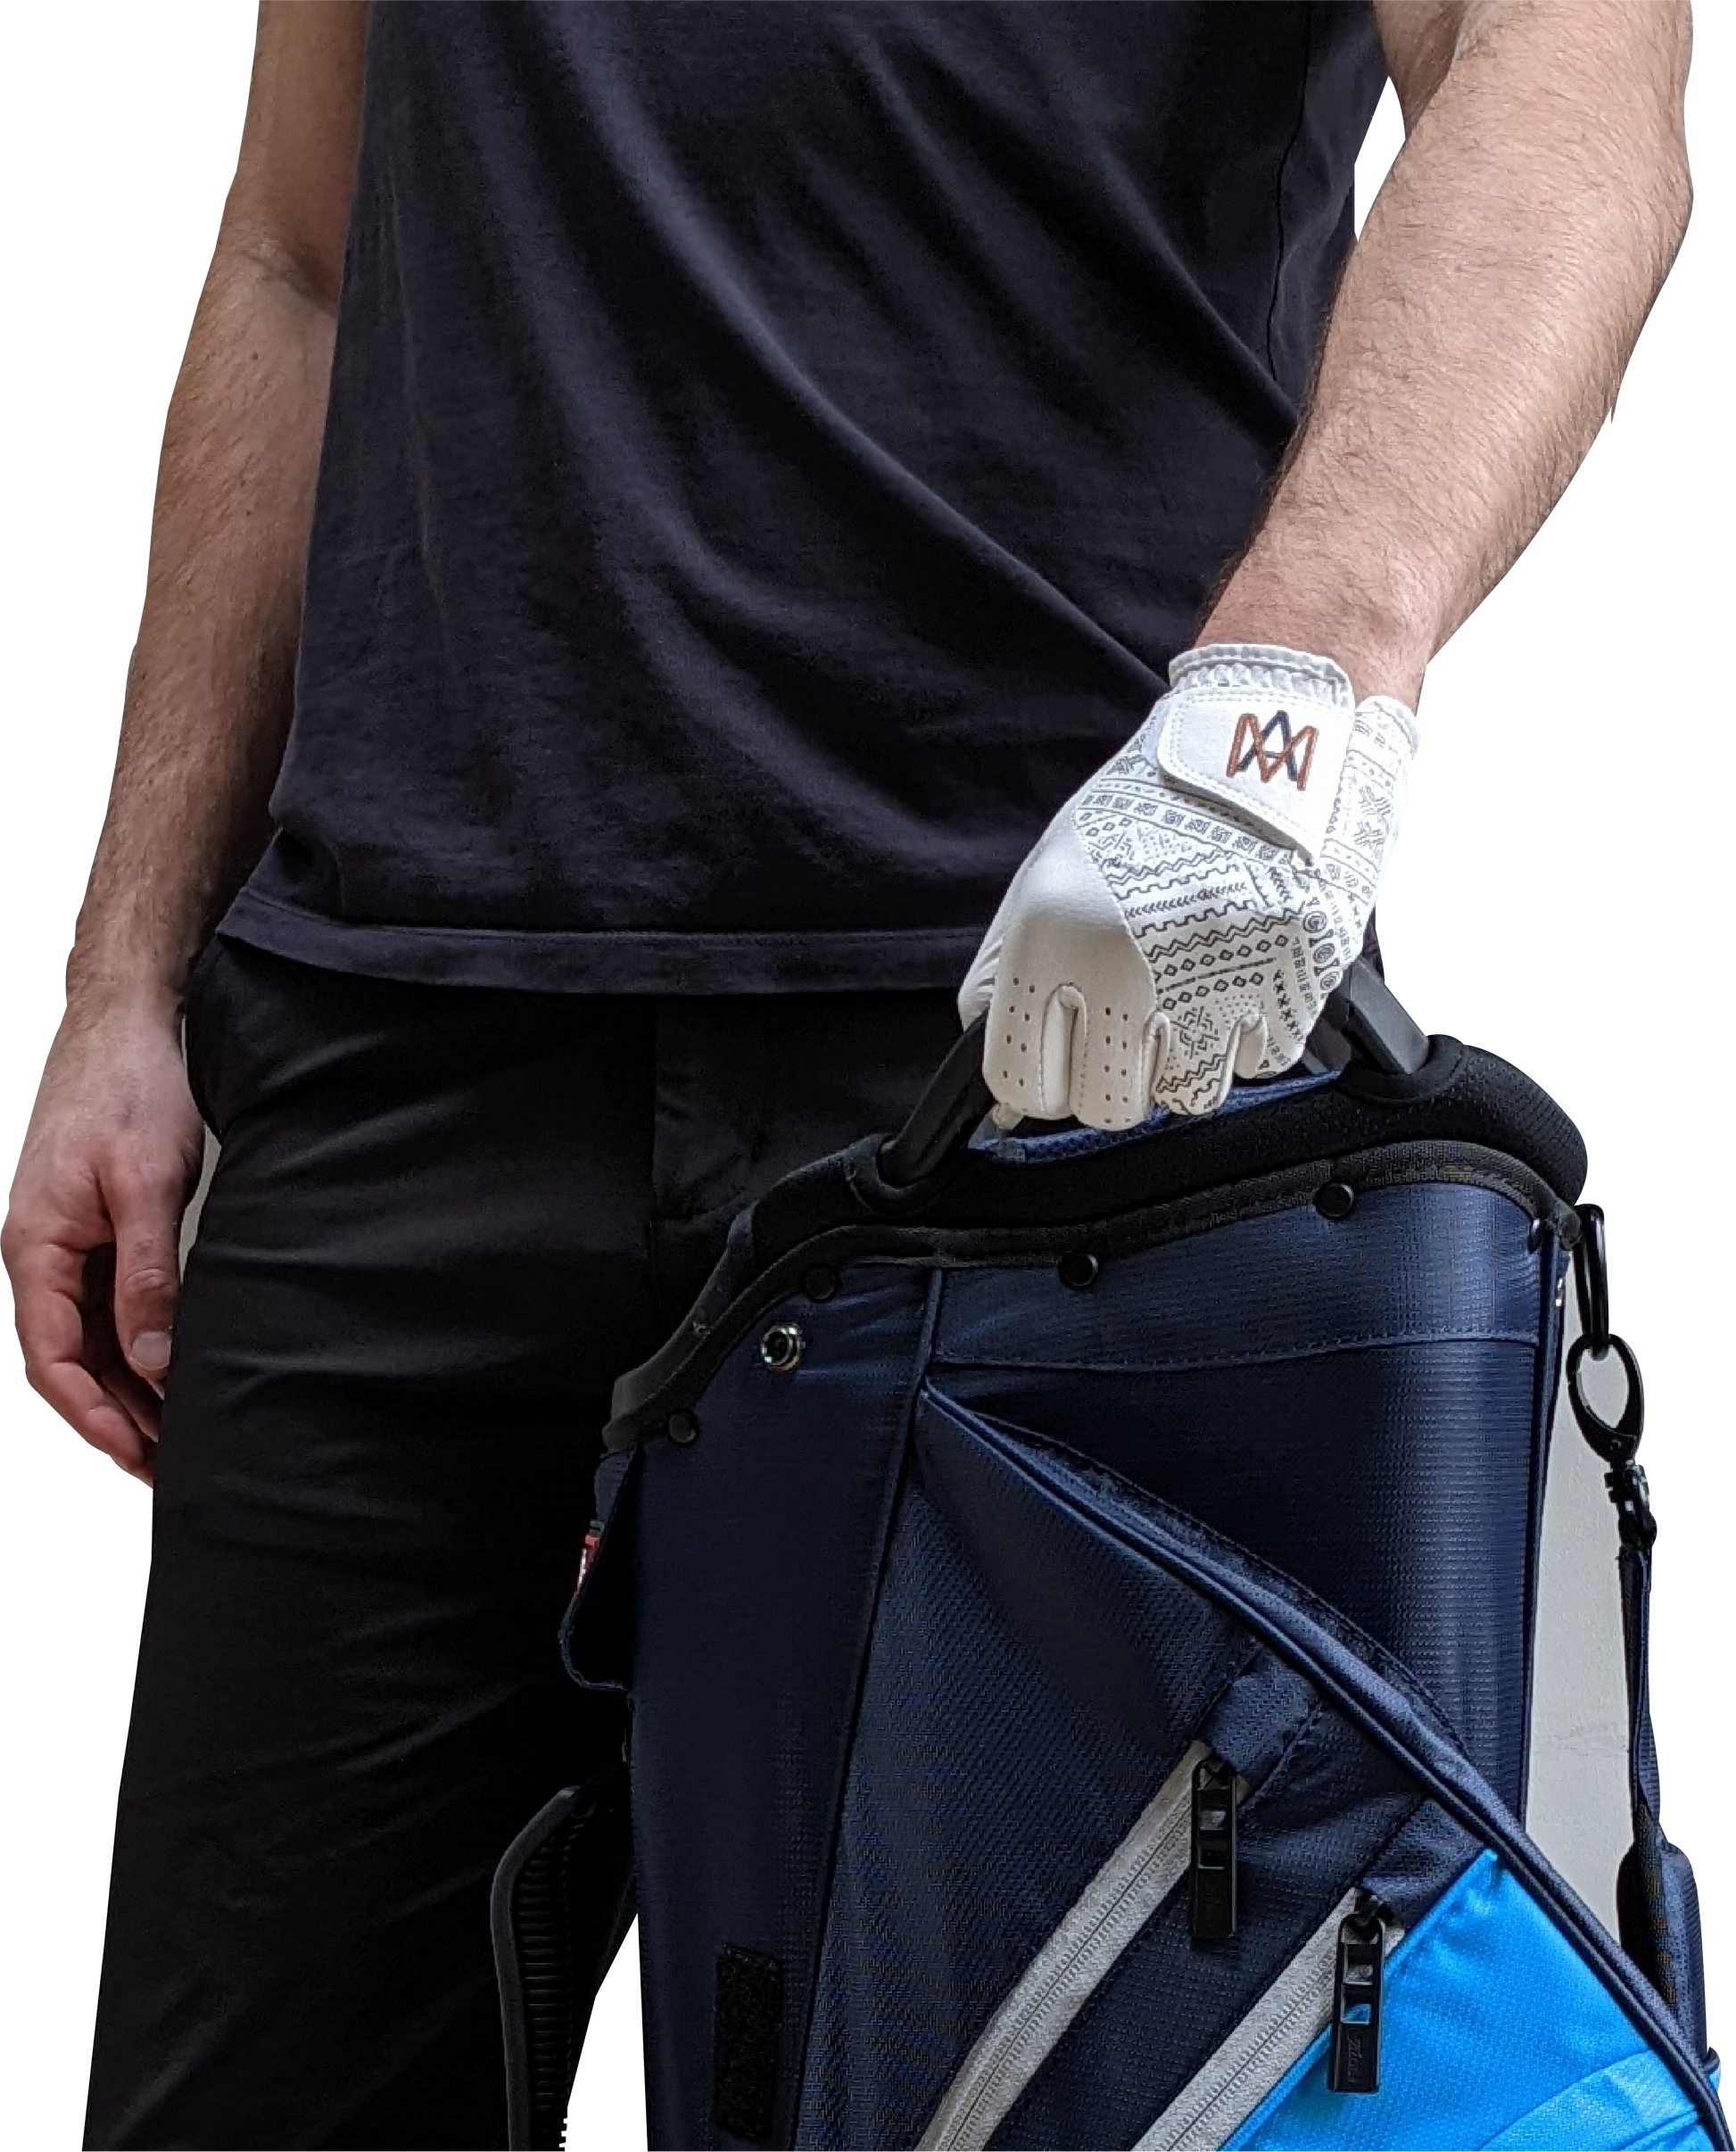 Lifestyle picture - The A.M. Tribe Golf Glove with Titleist cart bag and black polo shirt